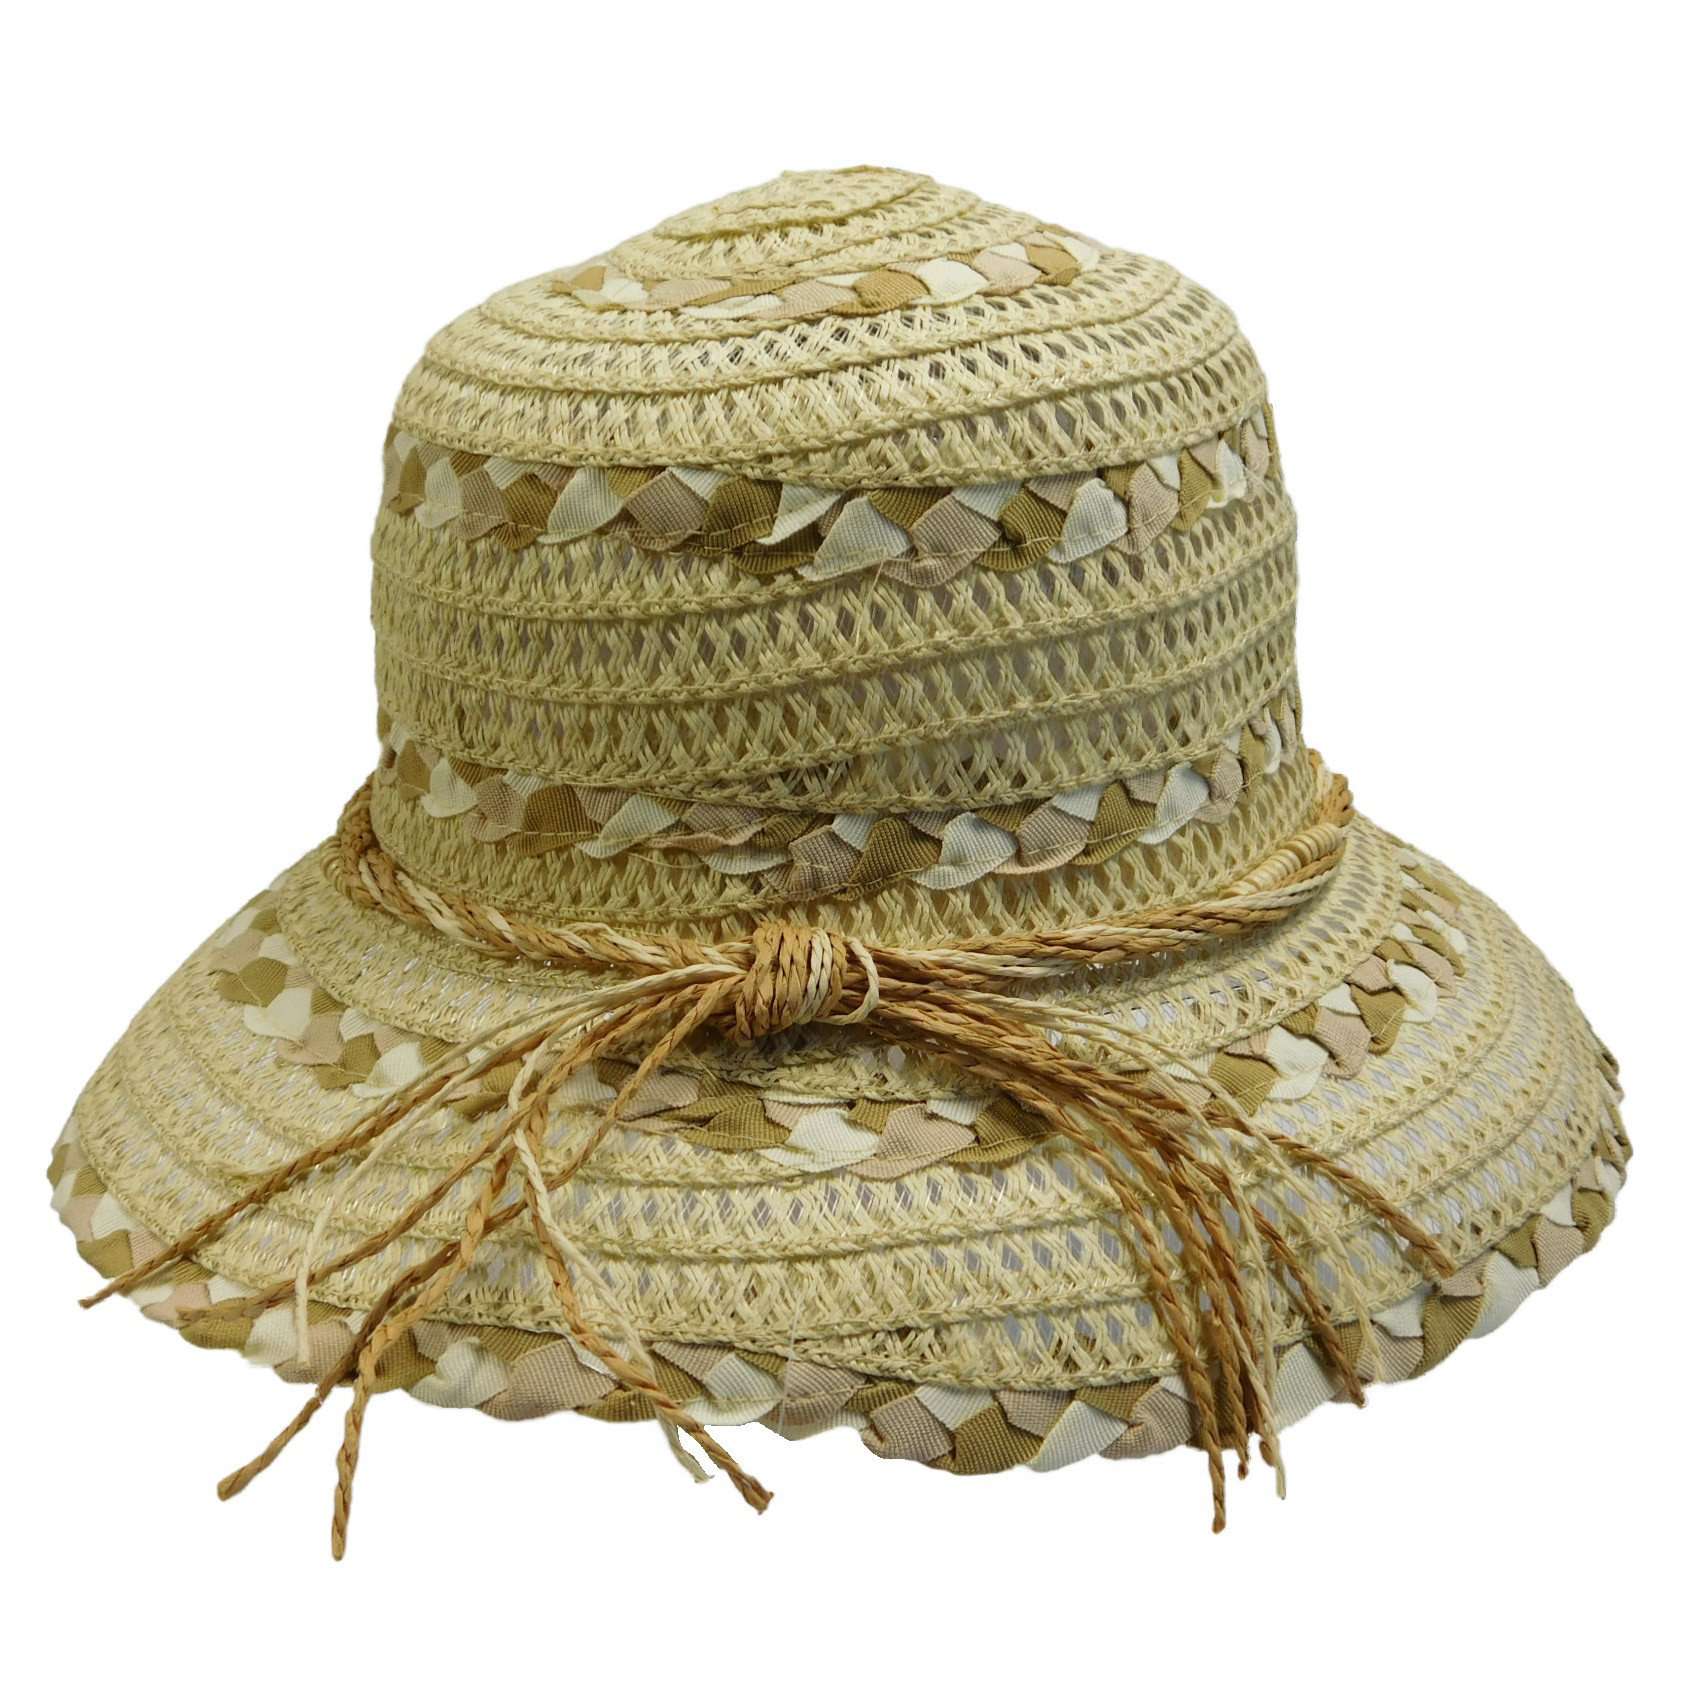 Braided Ribbon and Crocheted Straw Bucket Hat Jeanne Simmons    